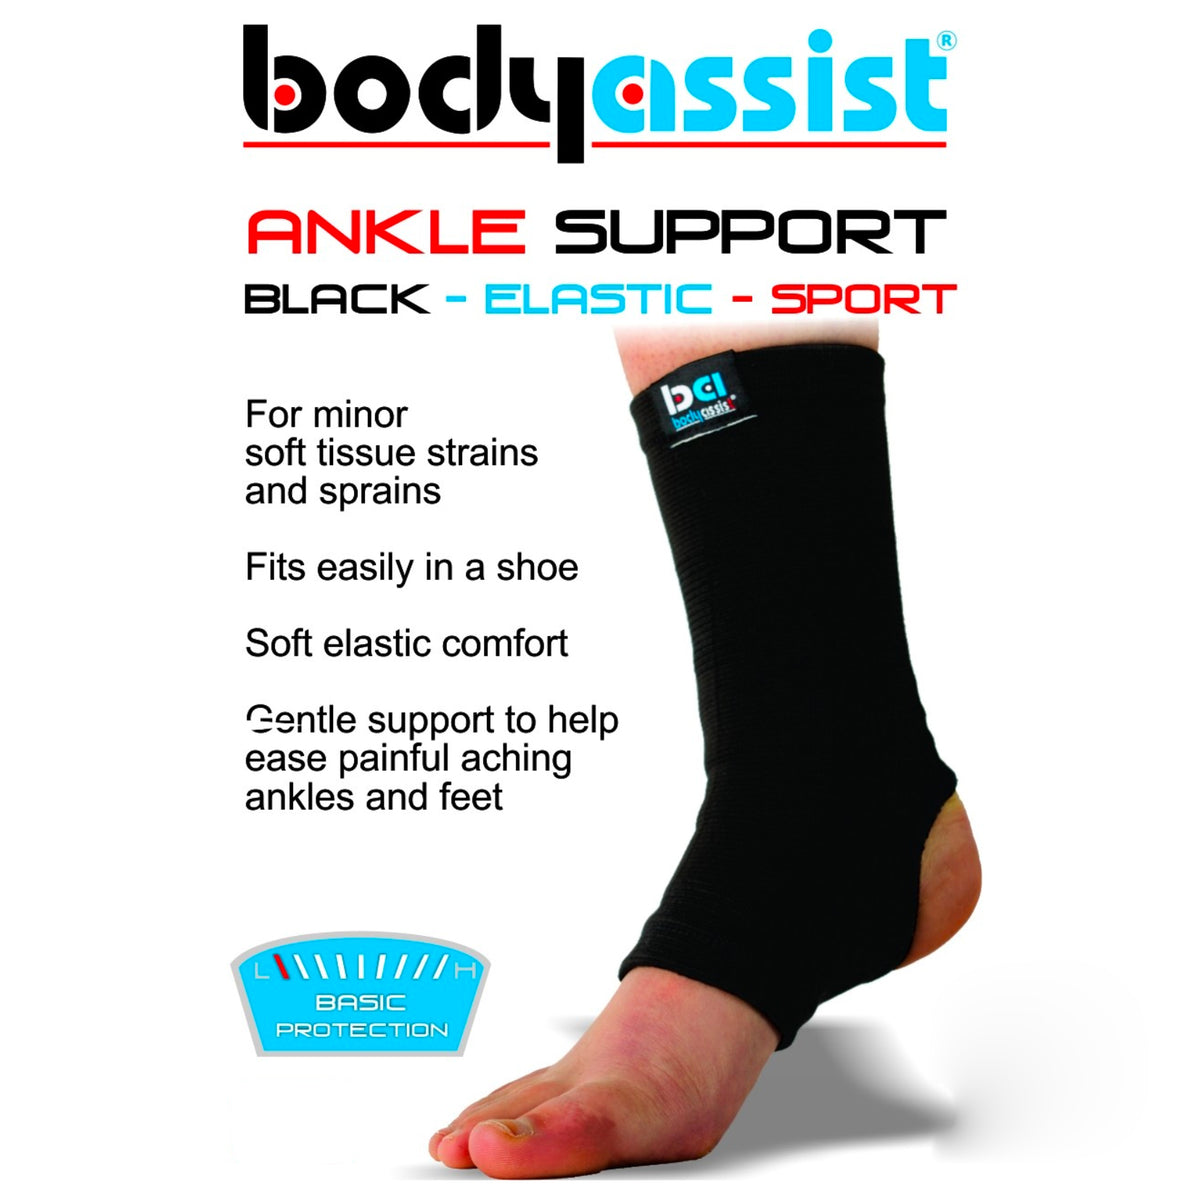 Crossover Elastic Ankle Support - Assist Health Supplies